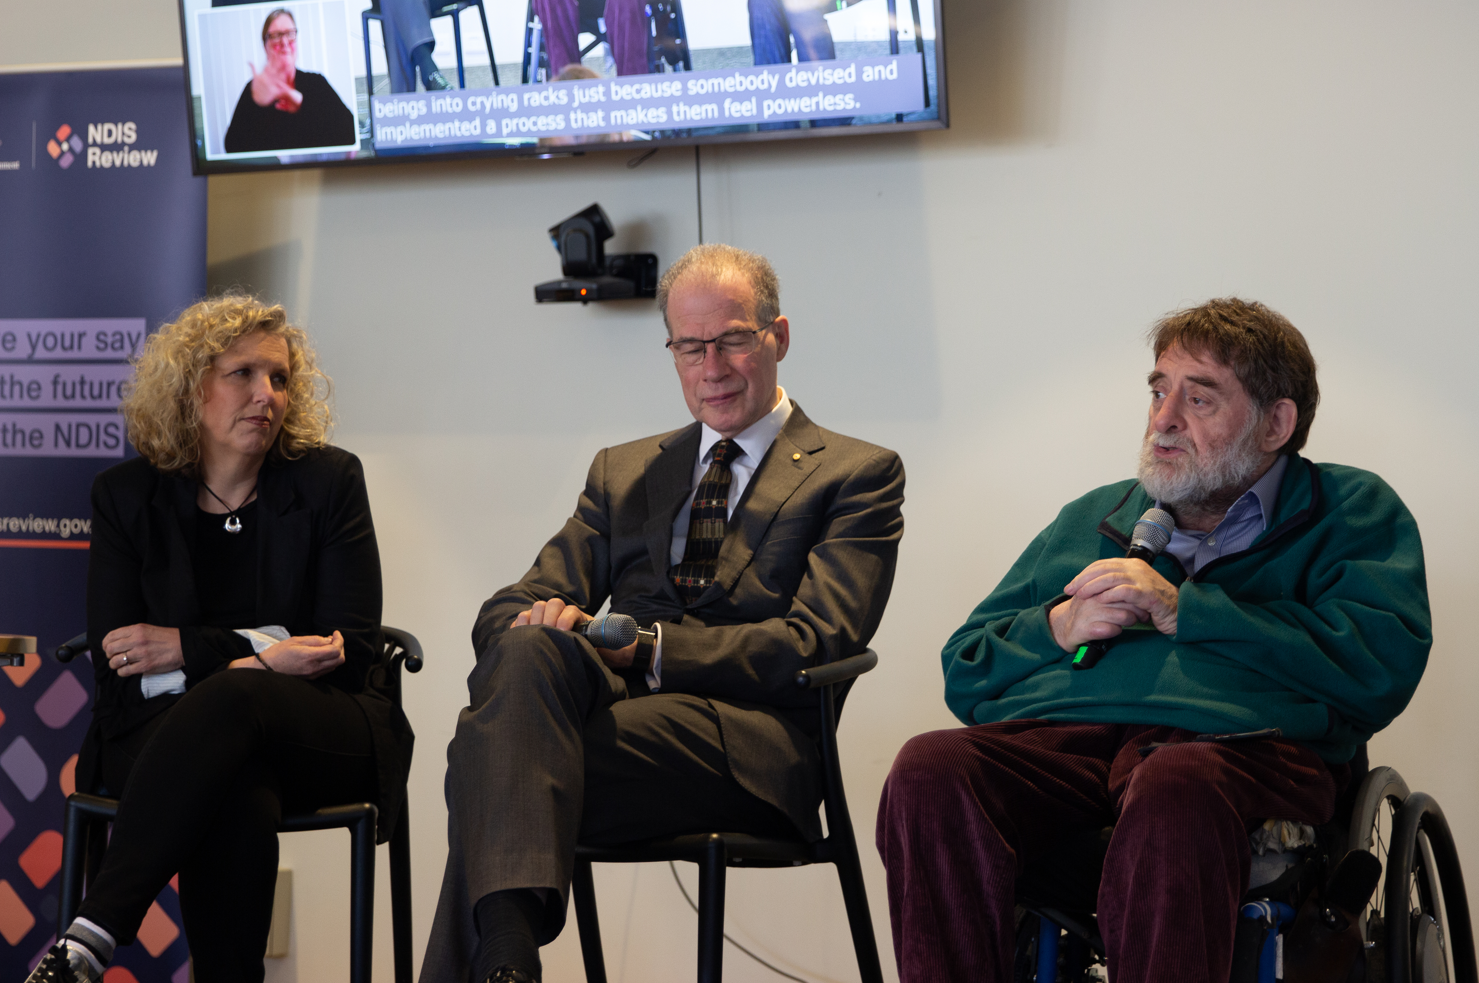 NDIS Review Panel Co-Chair Bruce Bonyhady (centre) and panel members Kirsten Deane (left) and Dougie Heard (right) speaking to community members in Geelong.